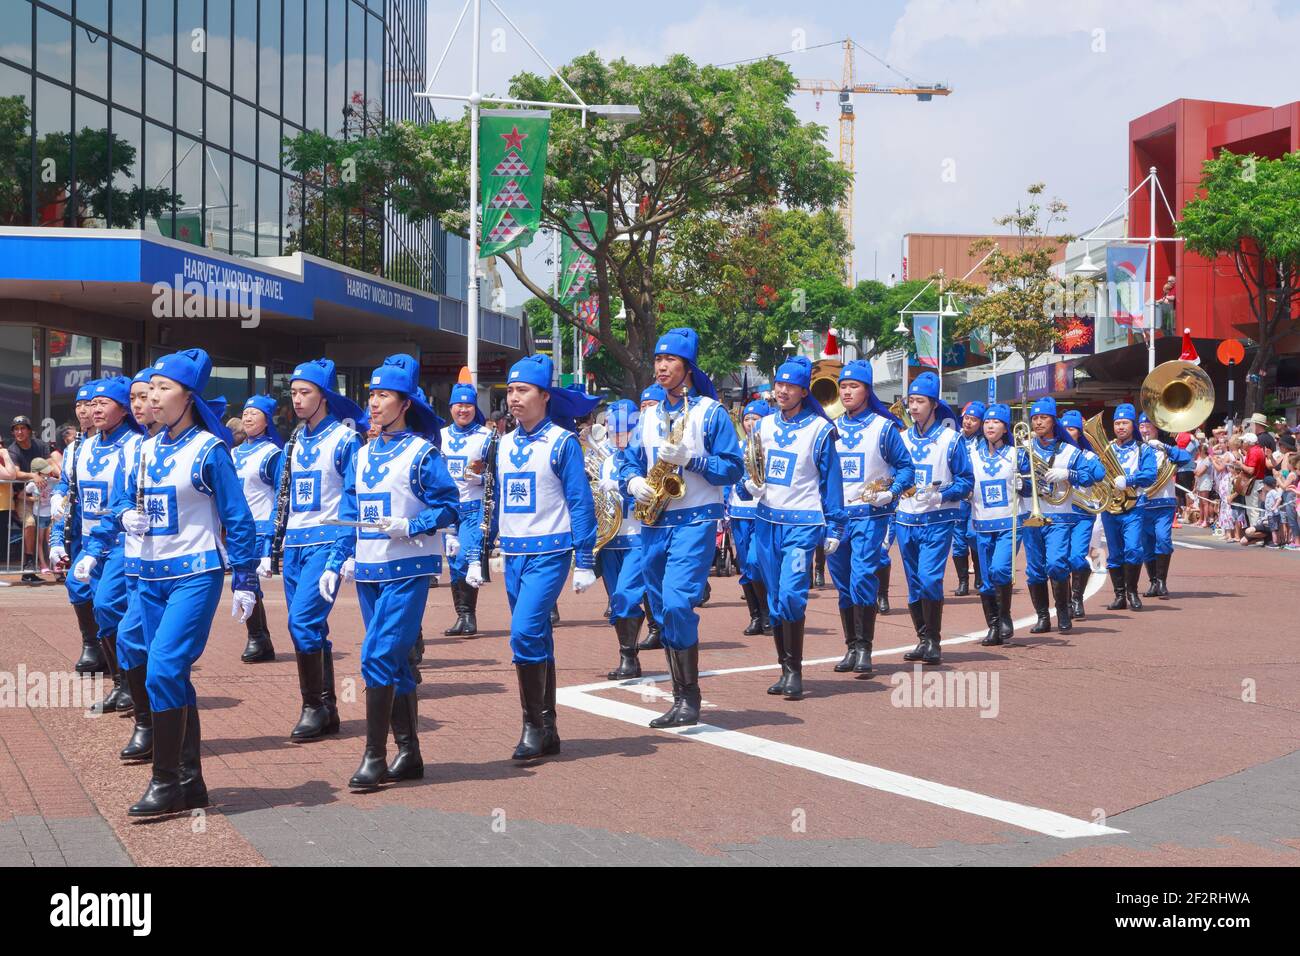 Members of Falun Dafa (Falun Gong), a Chinese religion, marching down the street in blue and white traditional clothing playing musical instruments Stock Photo